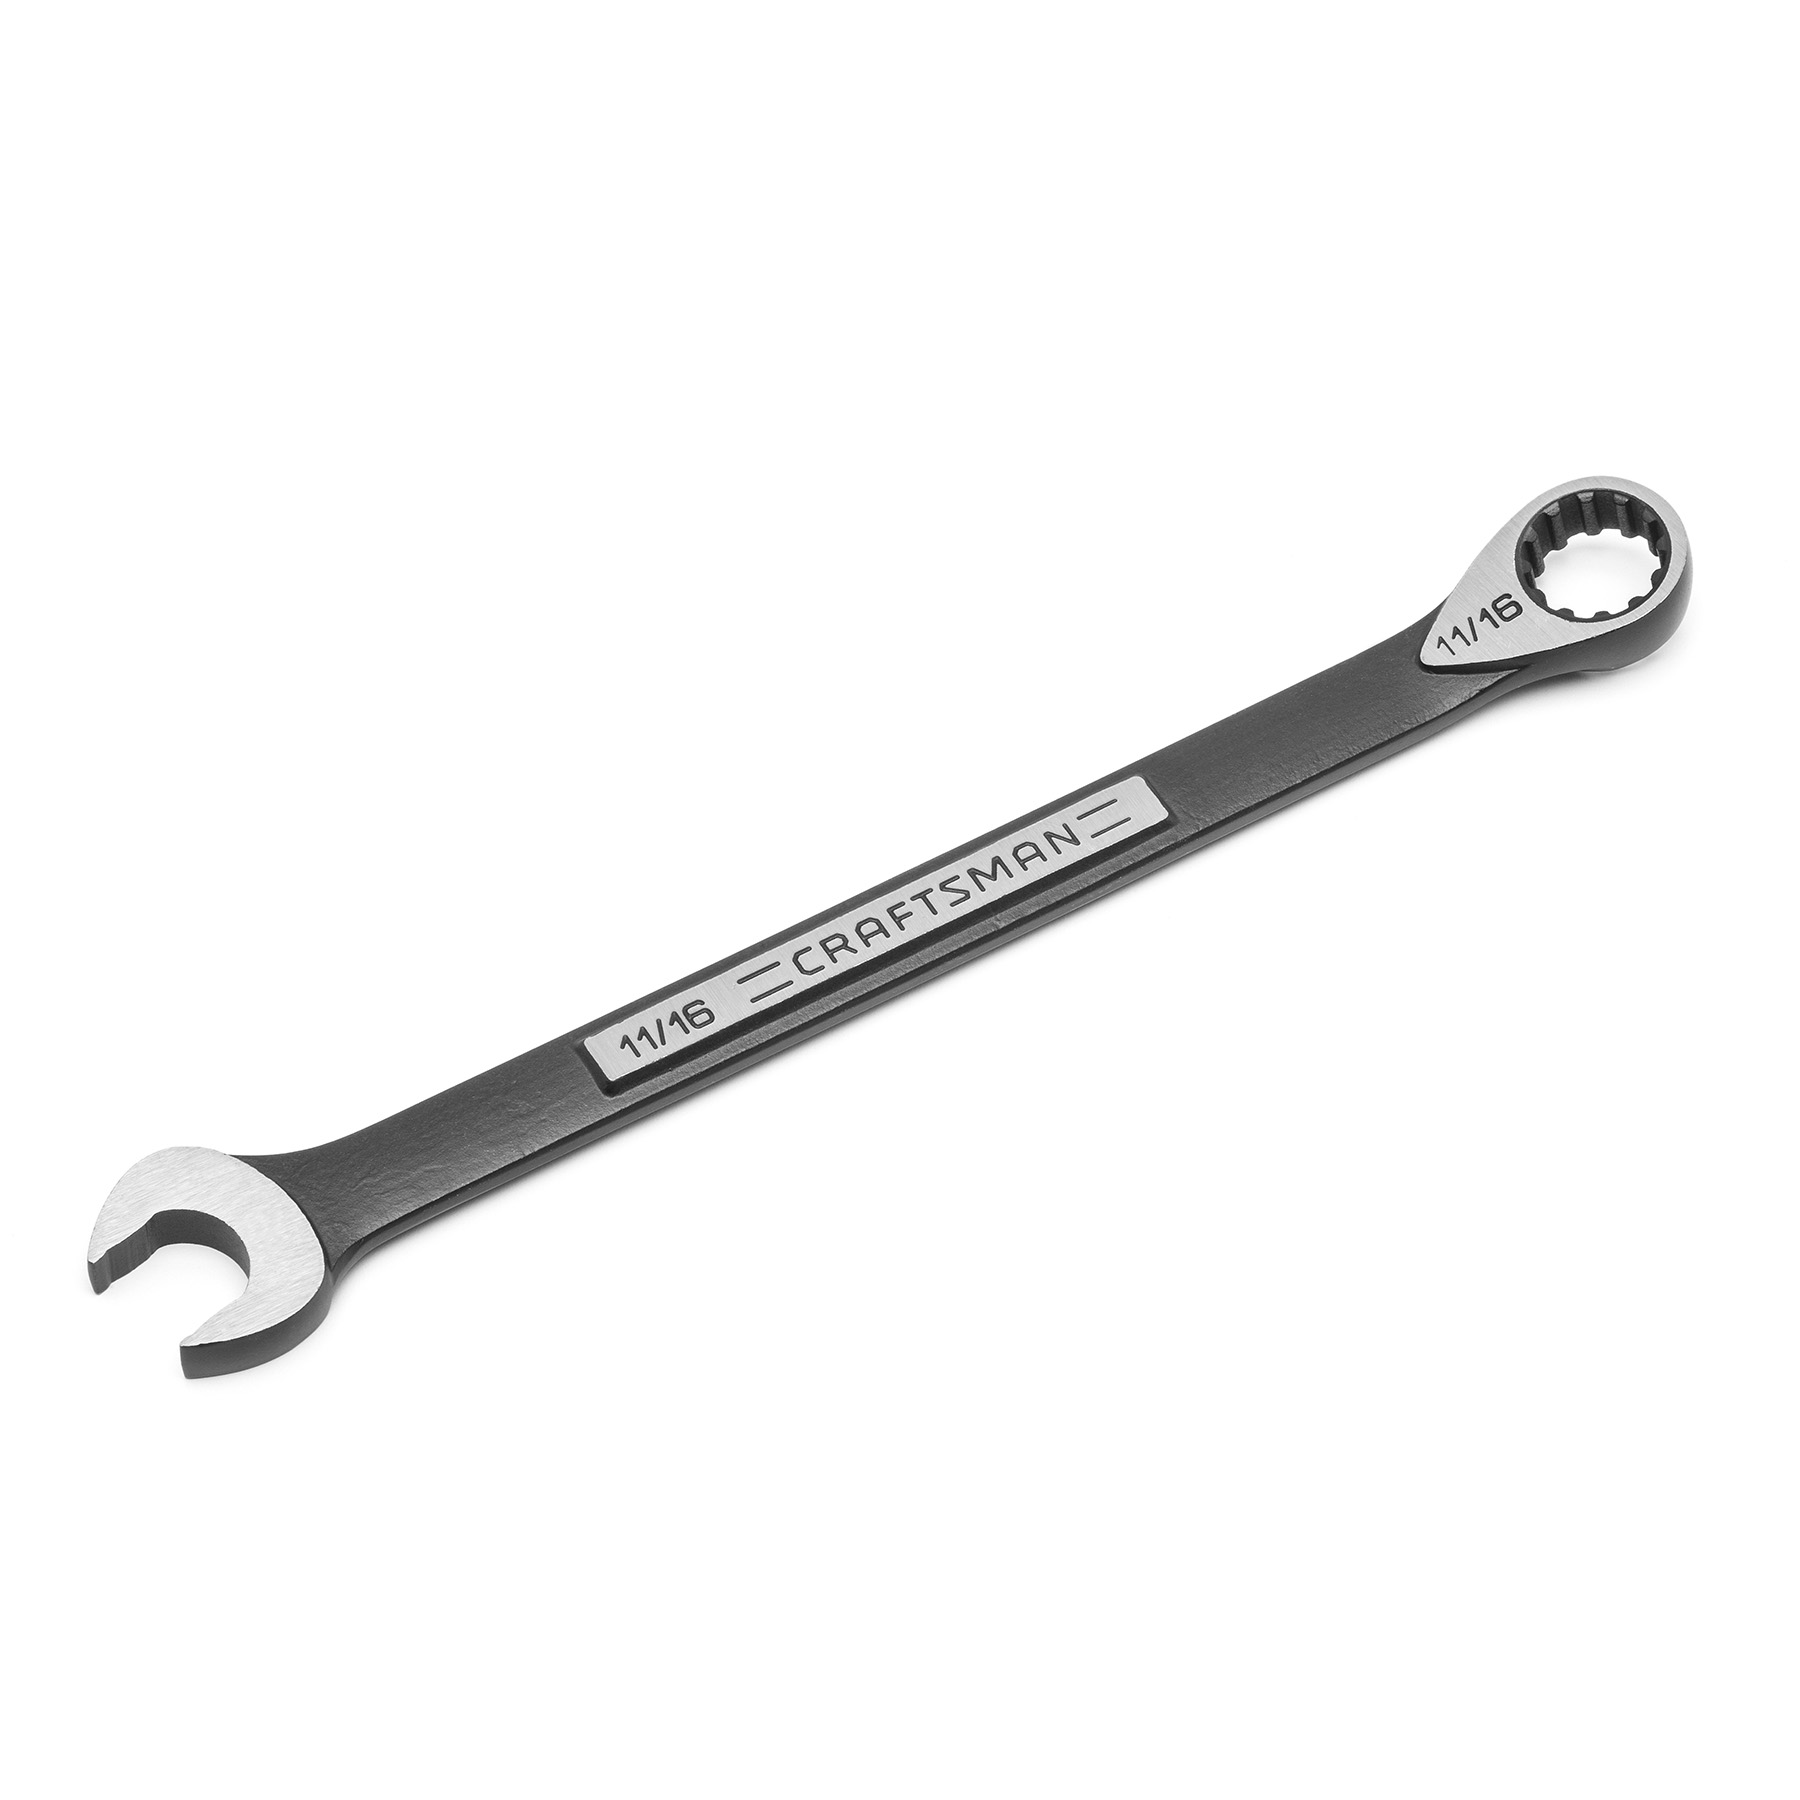 Craftsman 11/16in. Universal Max Axess Combination Wrench